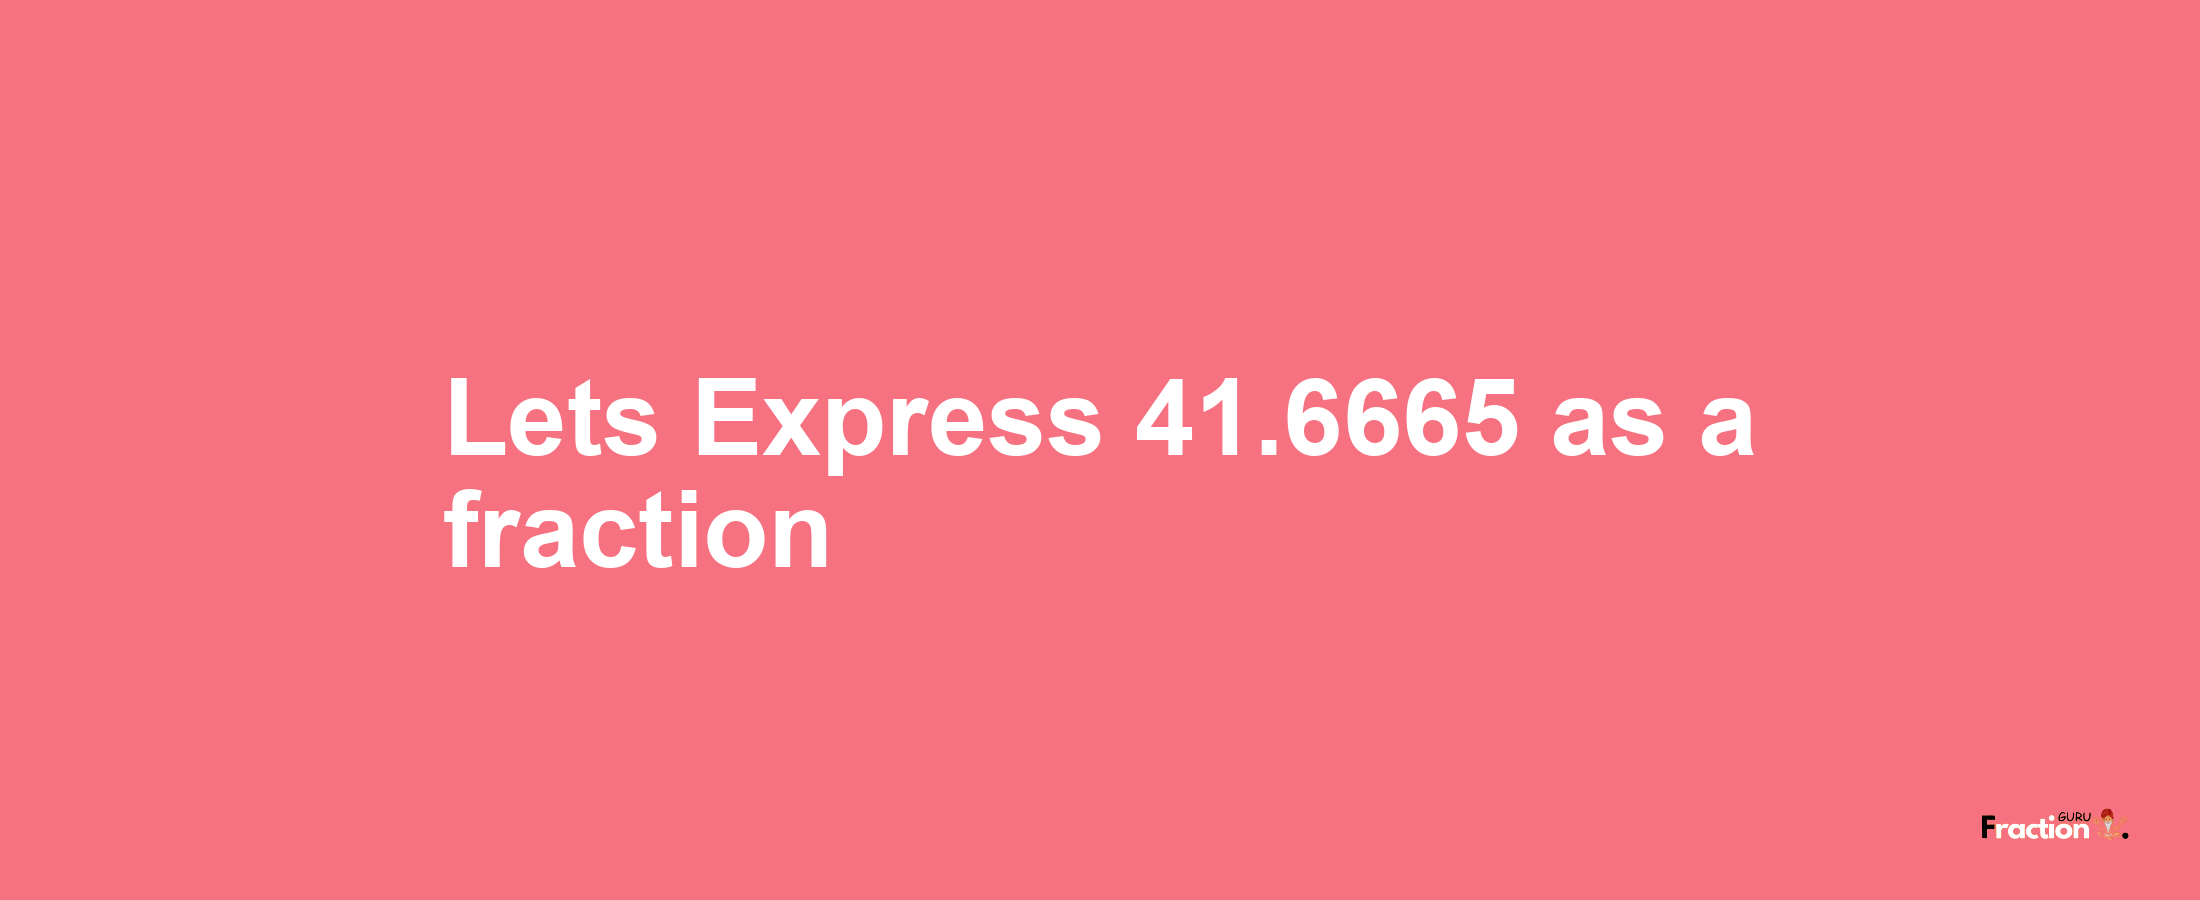 Lets Express 41.6665 as afraction